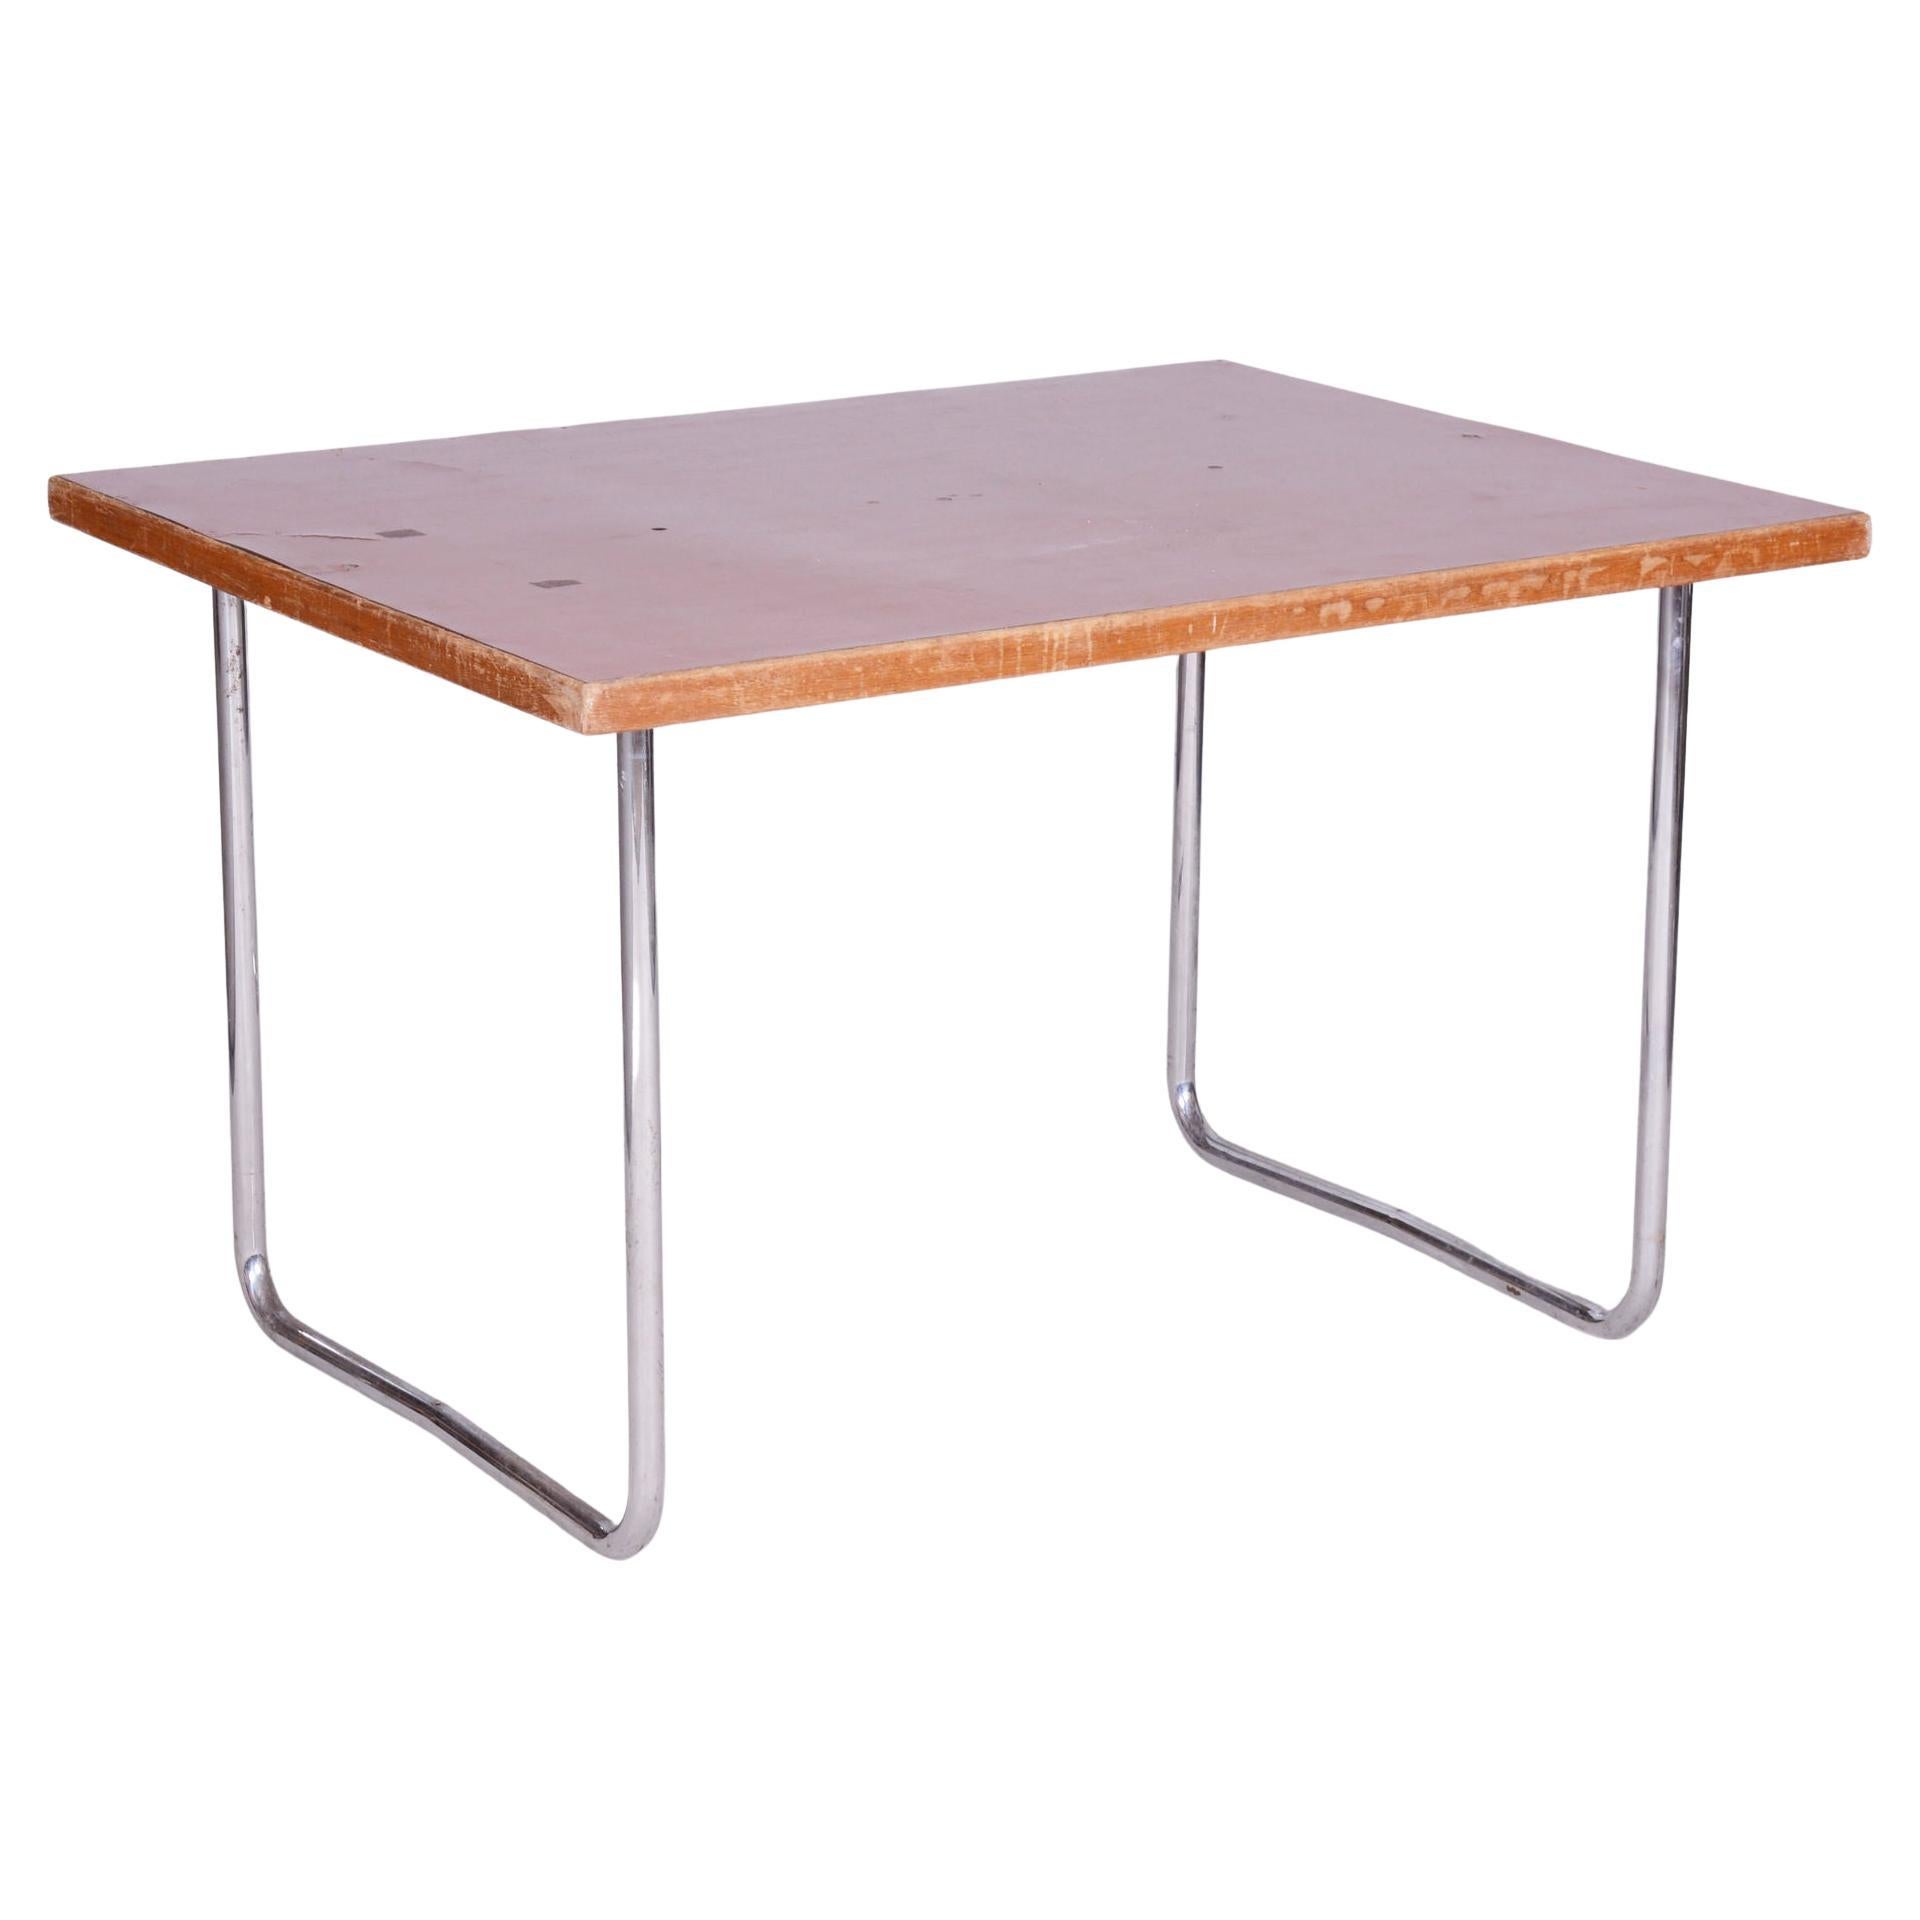 Original Bauhaus Dining Table, by Mücke - Melder, Well Preserved, Czech, 1930s For Sale